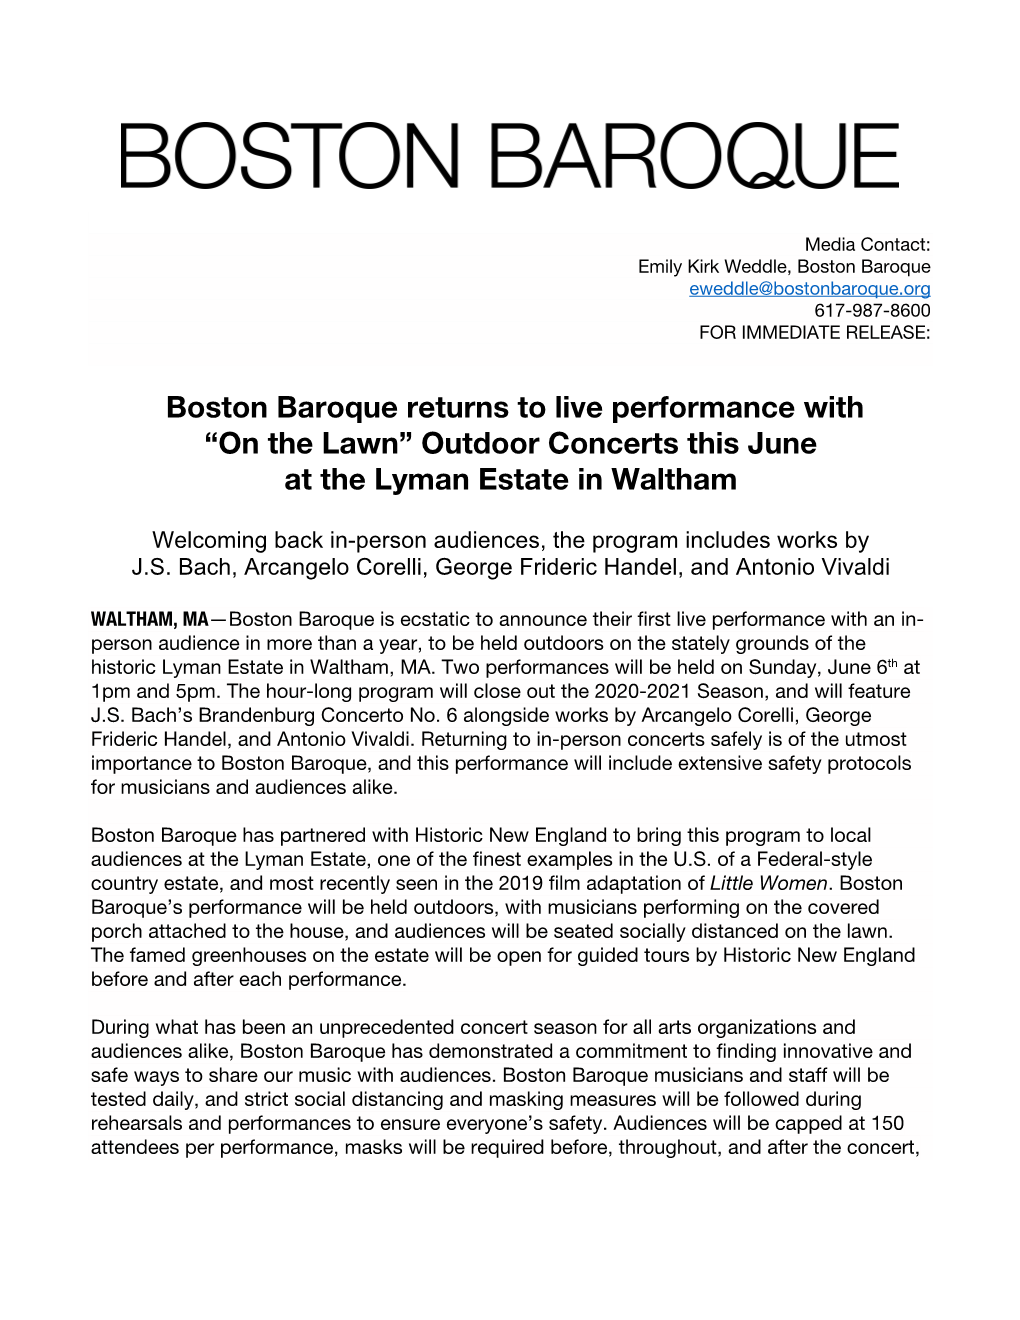 Boston Baroque Returns to Live Performance with “On the Lawn” Outdoor Concerts This June at the Lyman Estate in Waltham